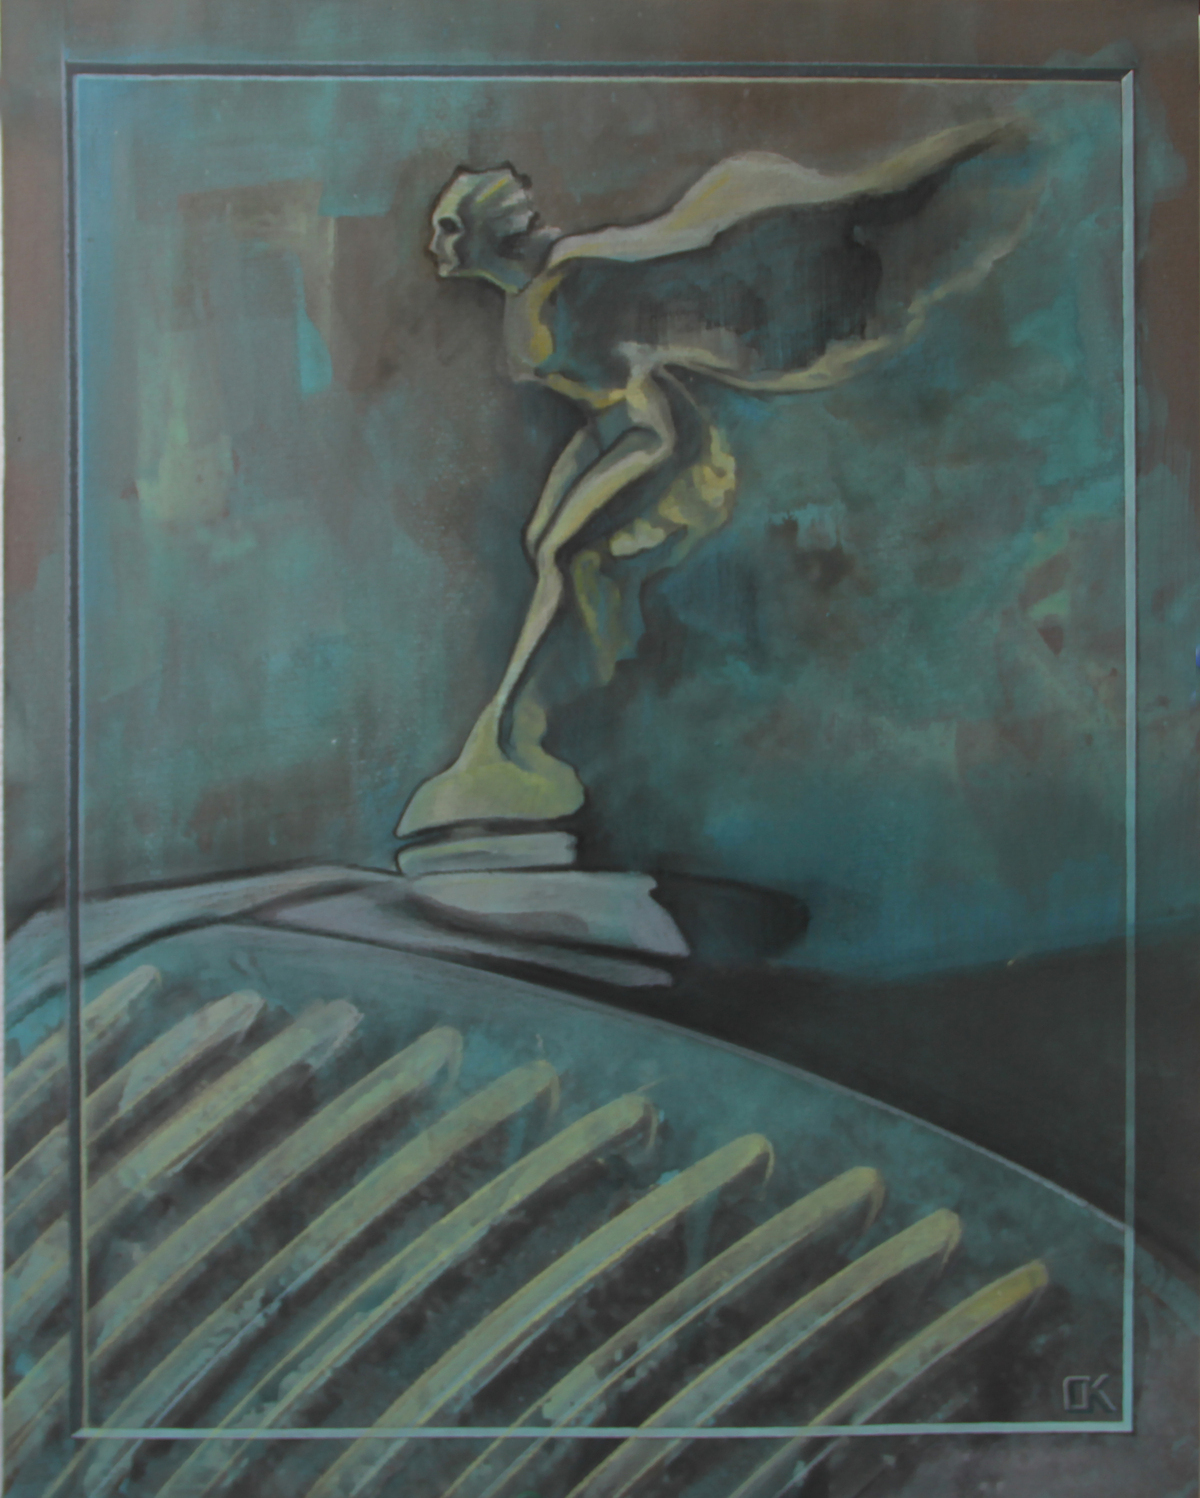 <span style="font-style: italic;">
						Painting Original Created: 2021 * Size: 15.7 W (40cm) x 19.7 H (50cm) x 0.1 D in * Mediums: Acrylic * Materials: Paper *</span>